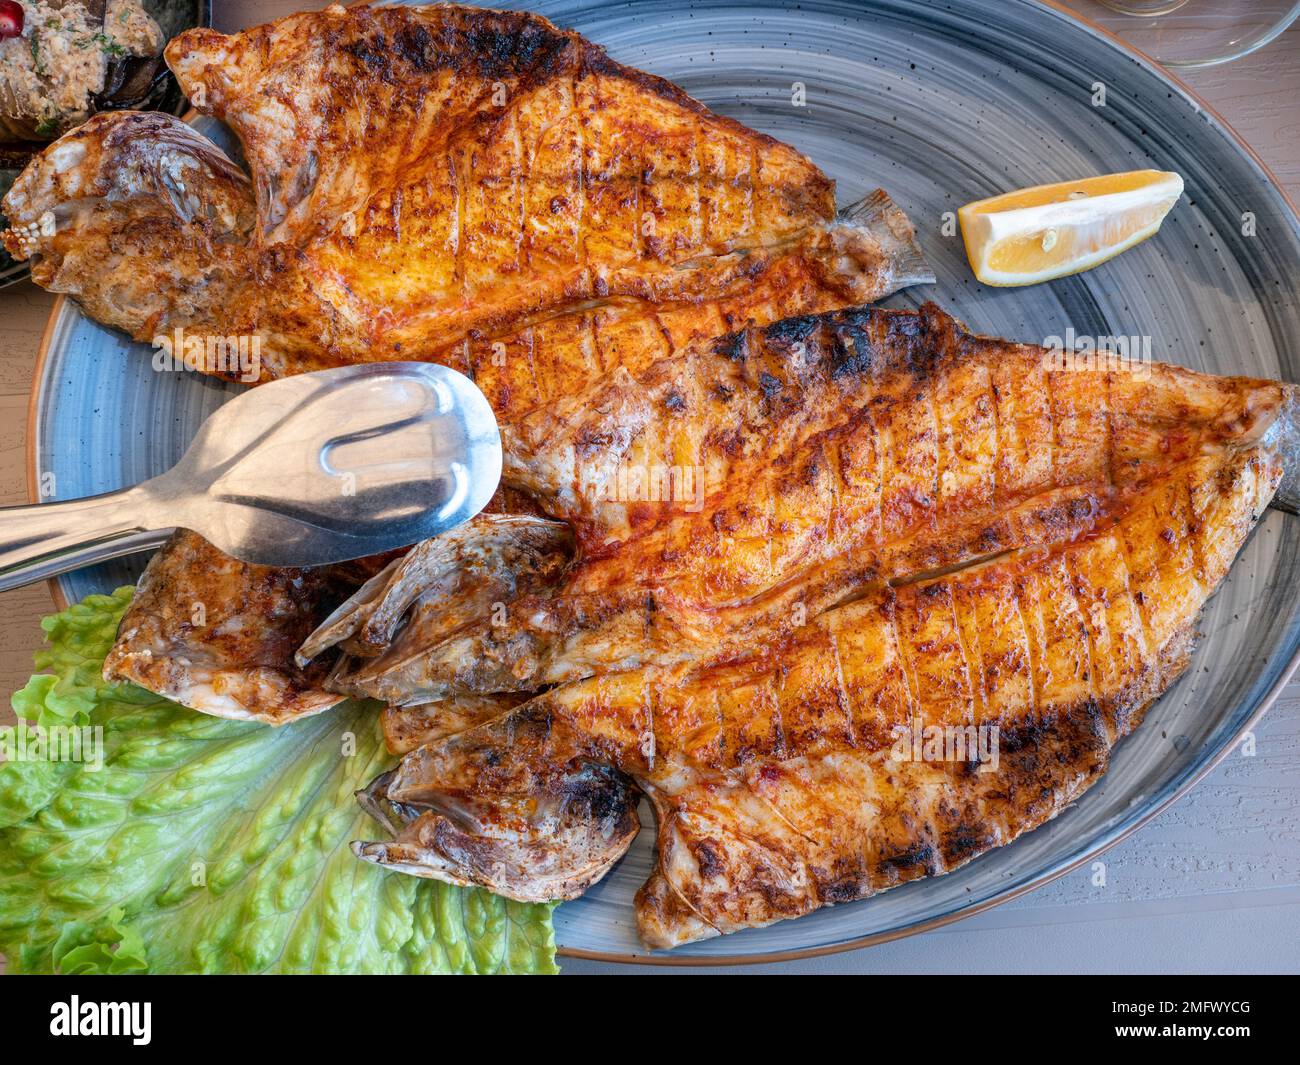 Grilled fish, fried sea bass on plate in restaurant, seafood healthy eating, top view. Stock Photo